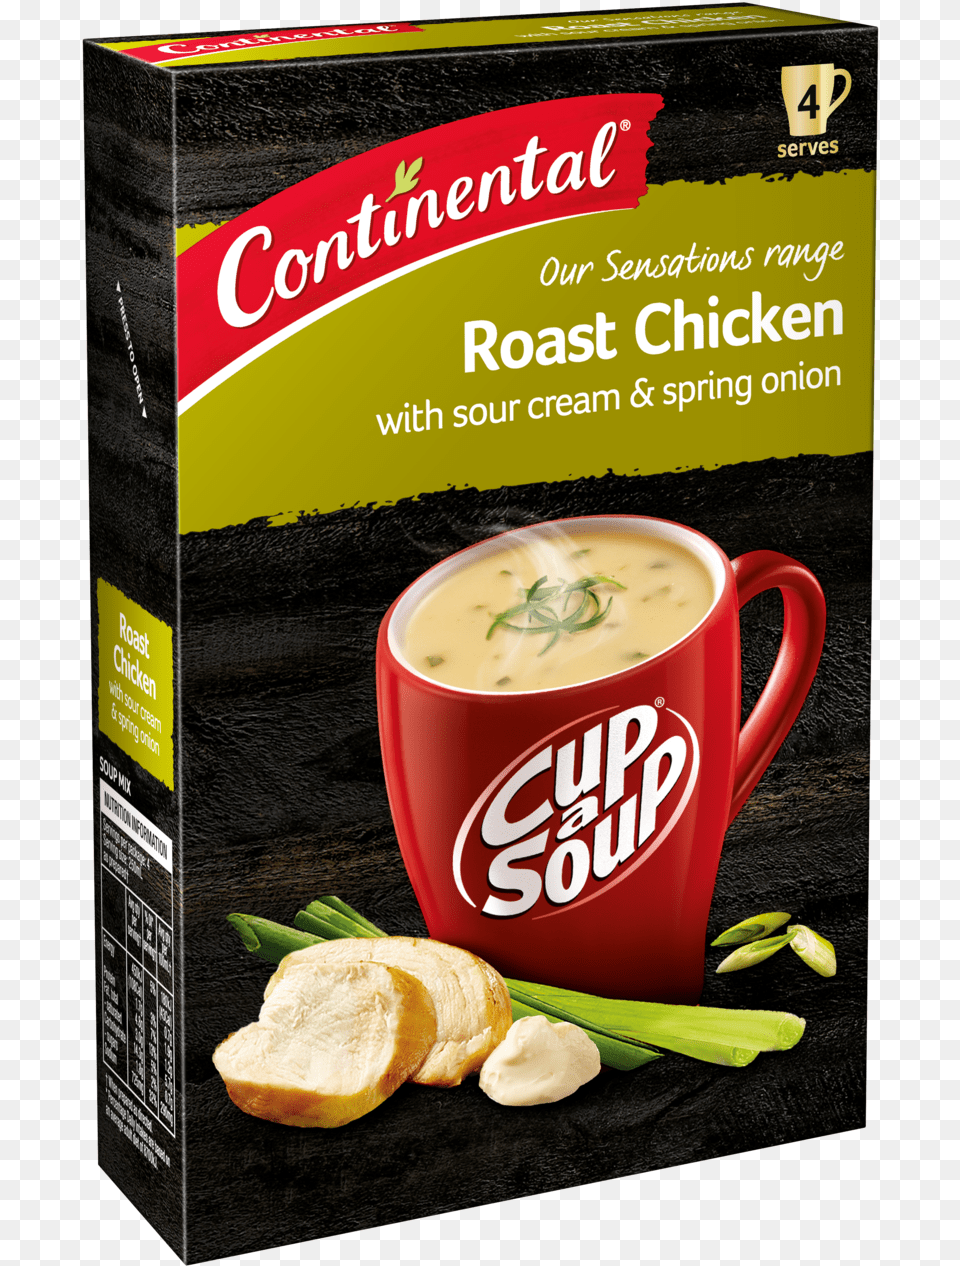 Roast Chicken With Sour Cream Amp Spring Onion Cup A Soup, Dish, Food, Meal, Bread Free Transparent Png